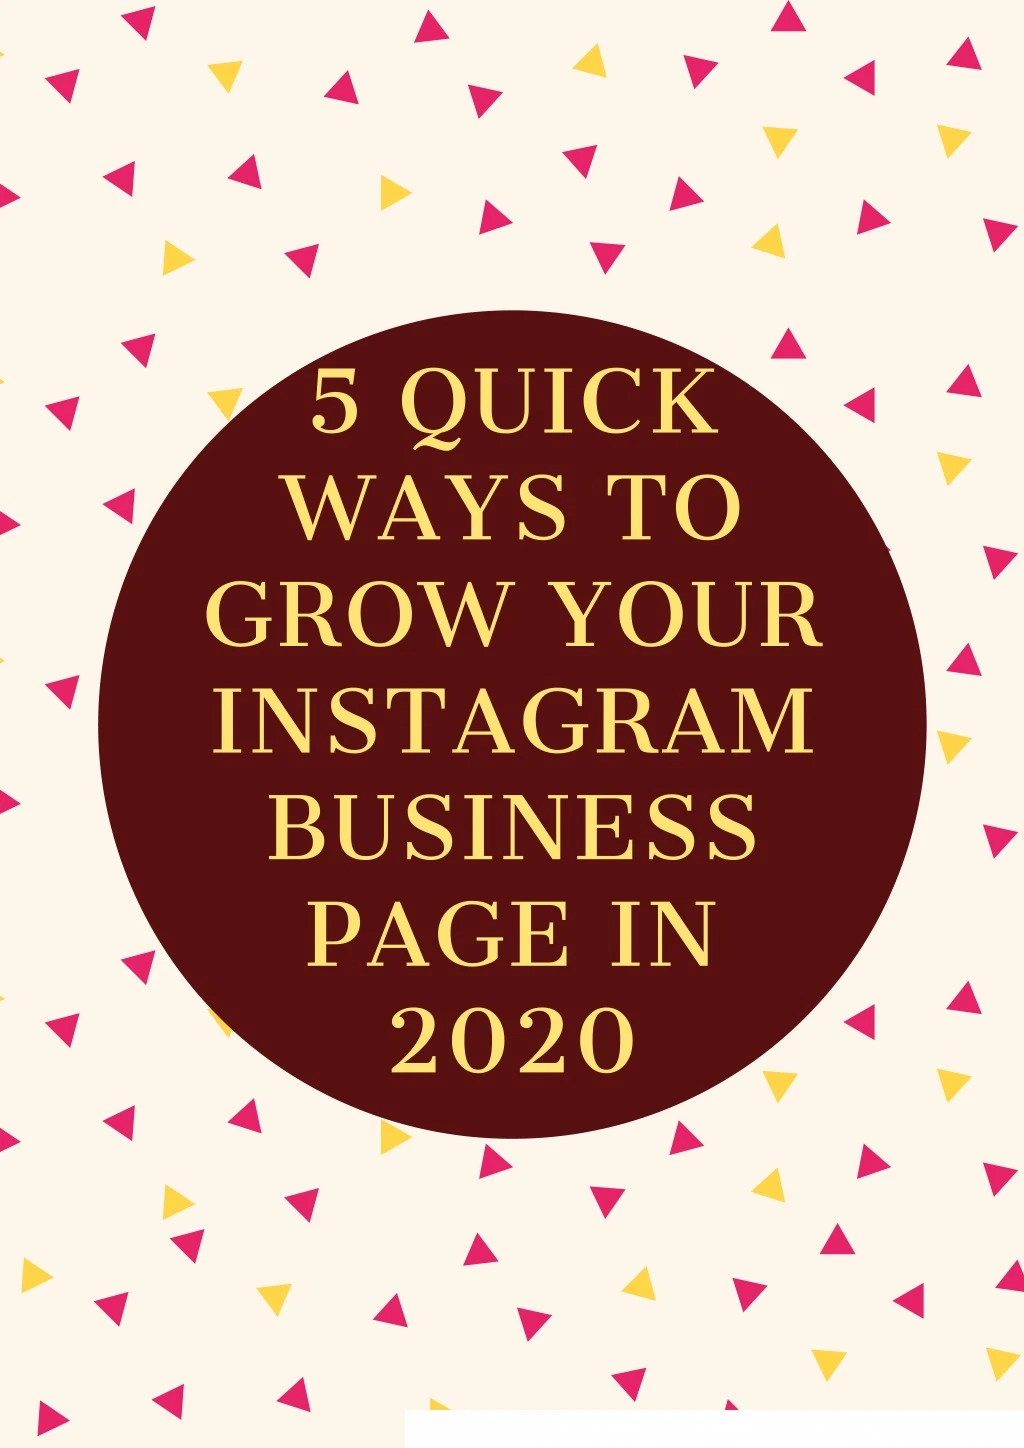 5 quick ways to grow your instagram business page